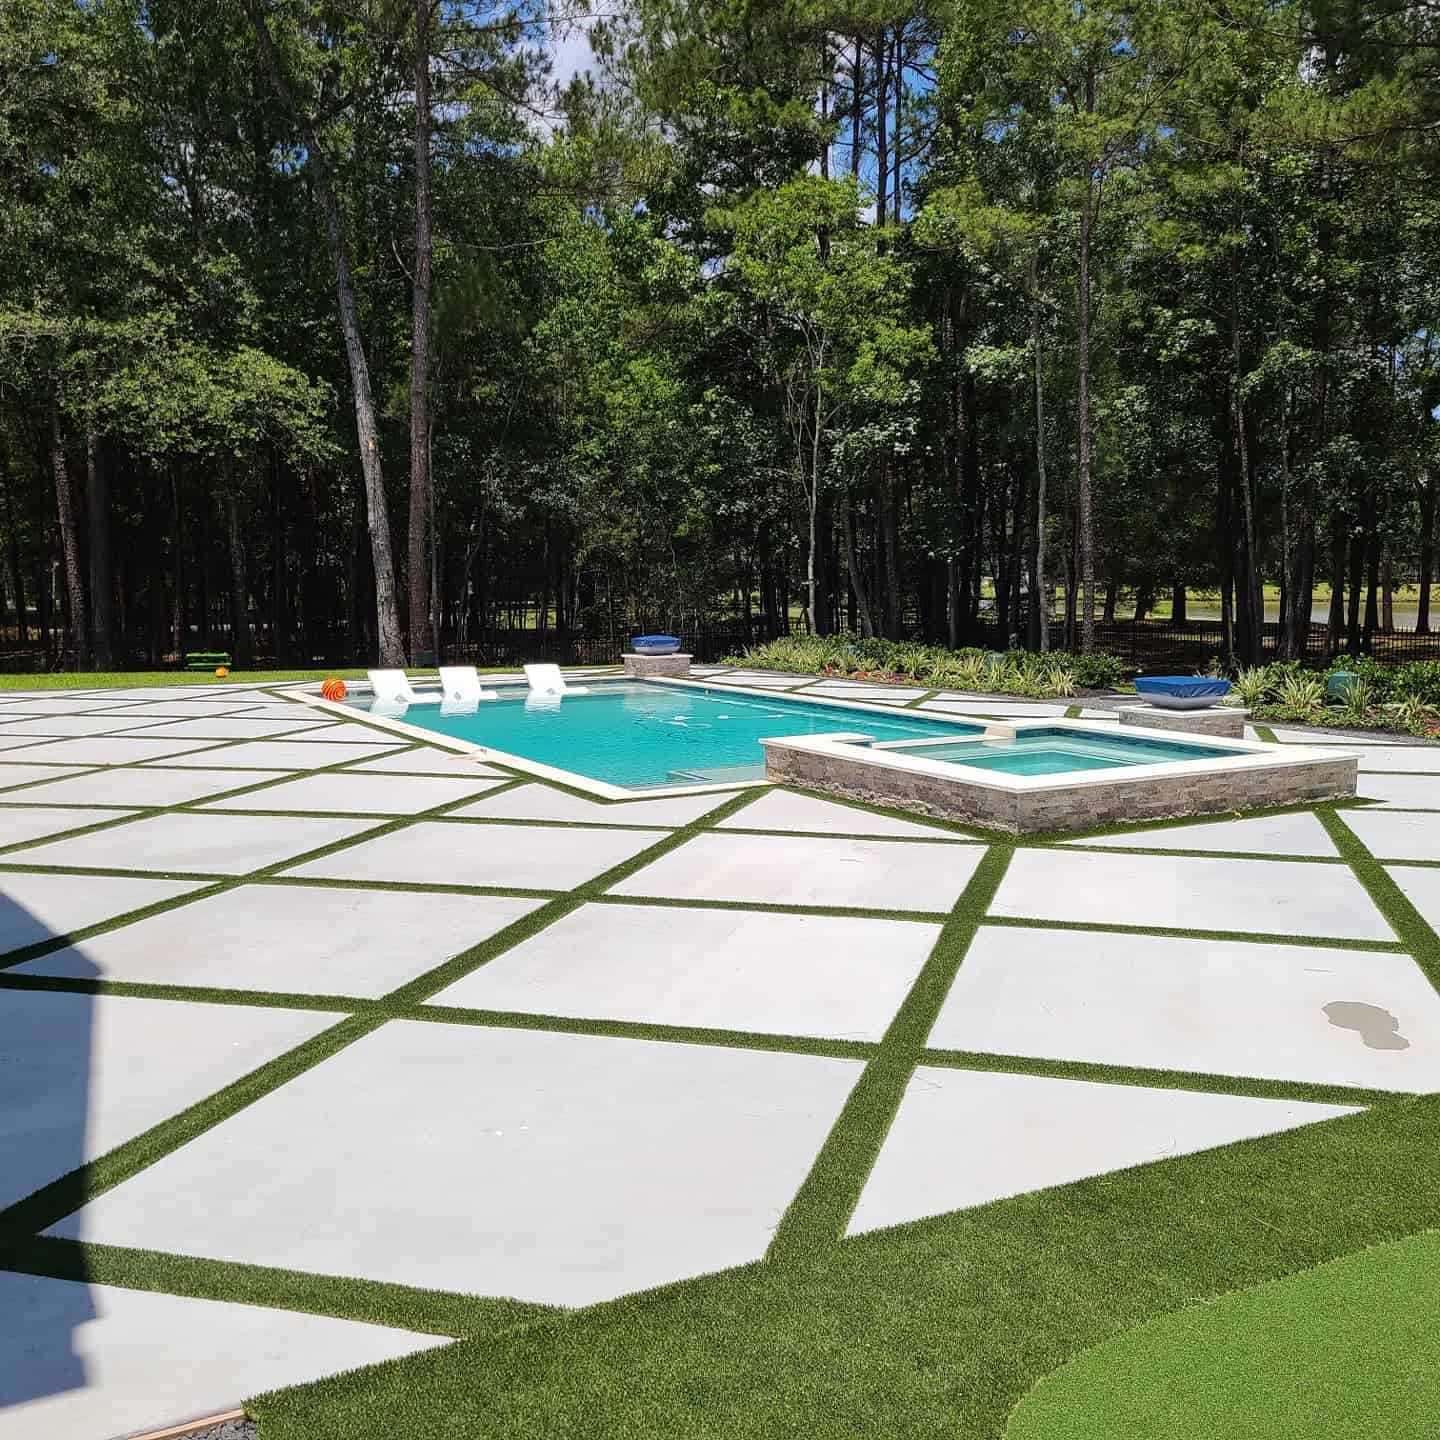 landscaping services completed for Houston, Texas residence